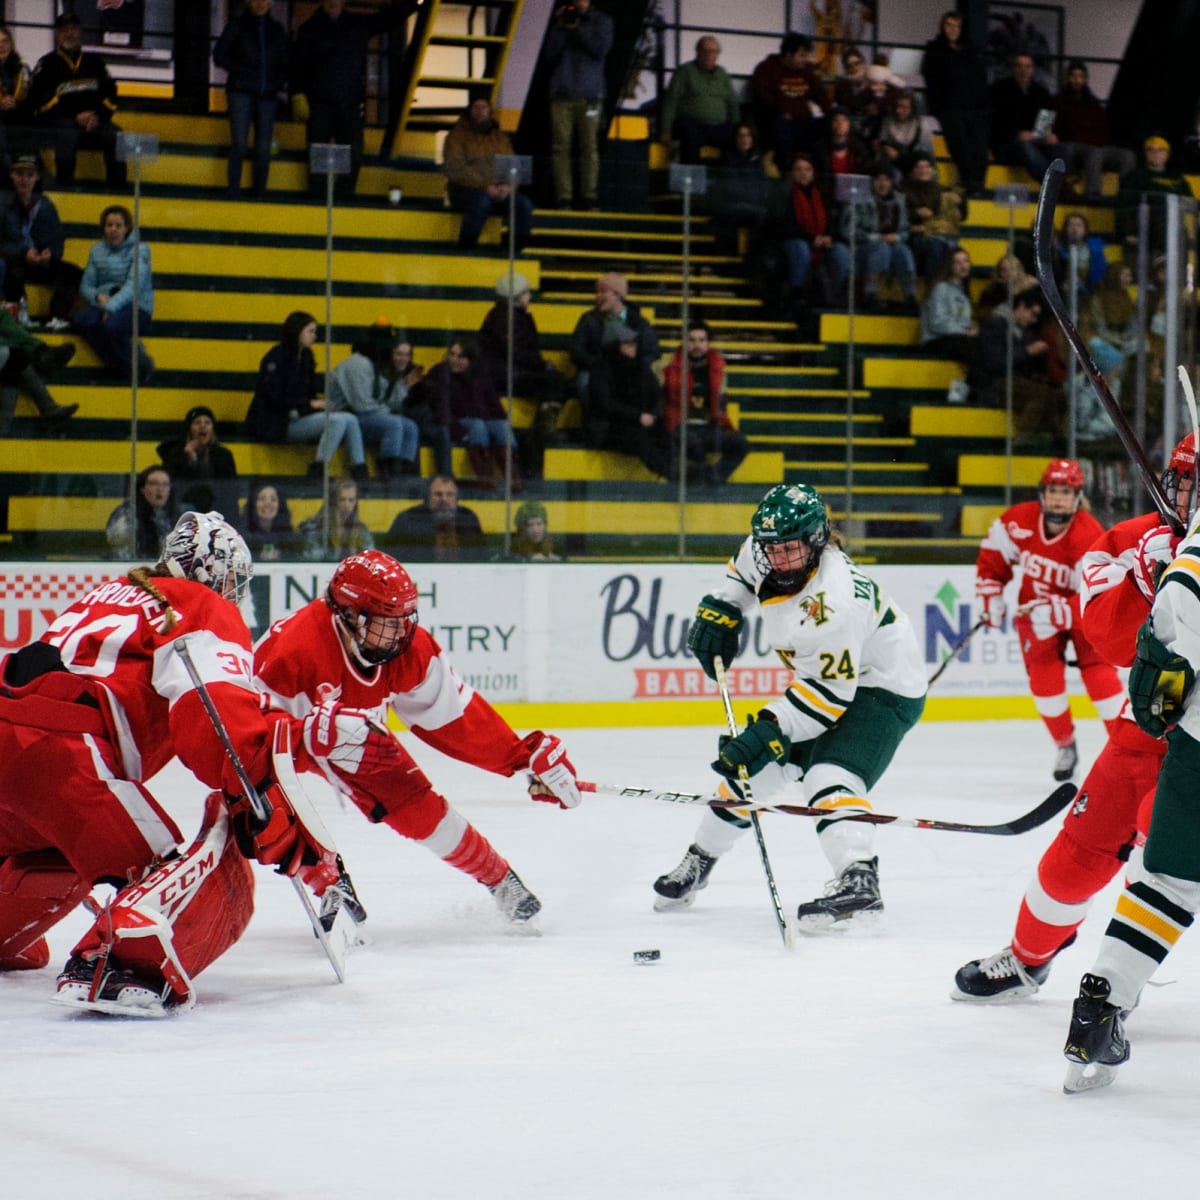 Watch Boston University vs Northeastern Stream womens hockey live - How to Watch and Stream Major League and College Sports